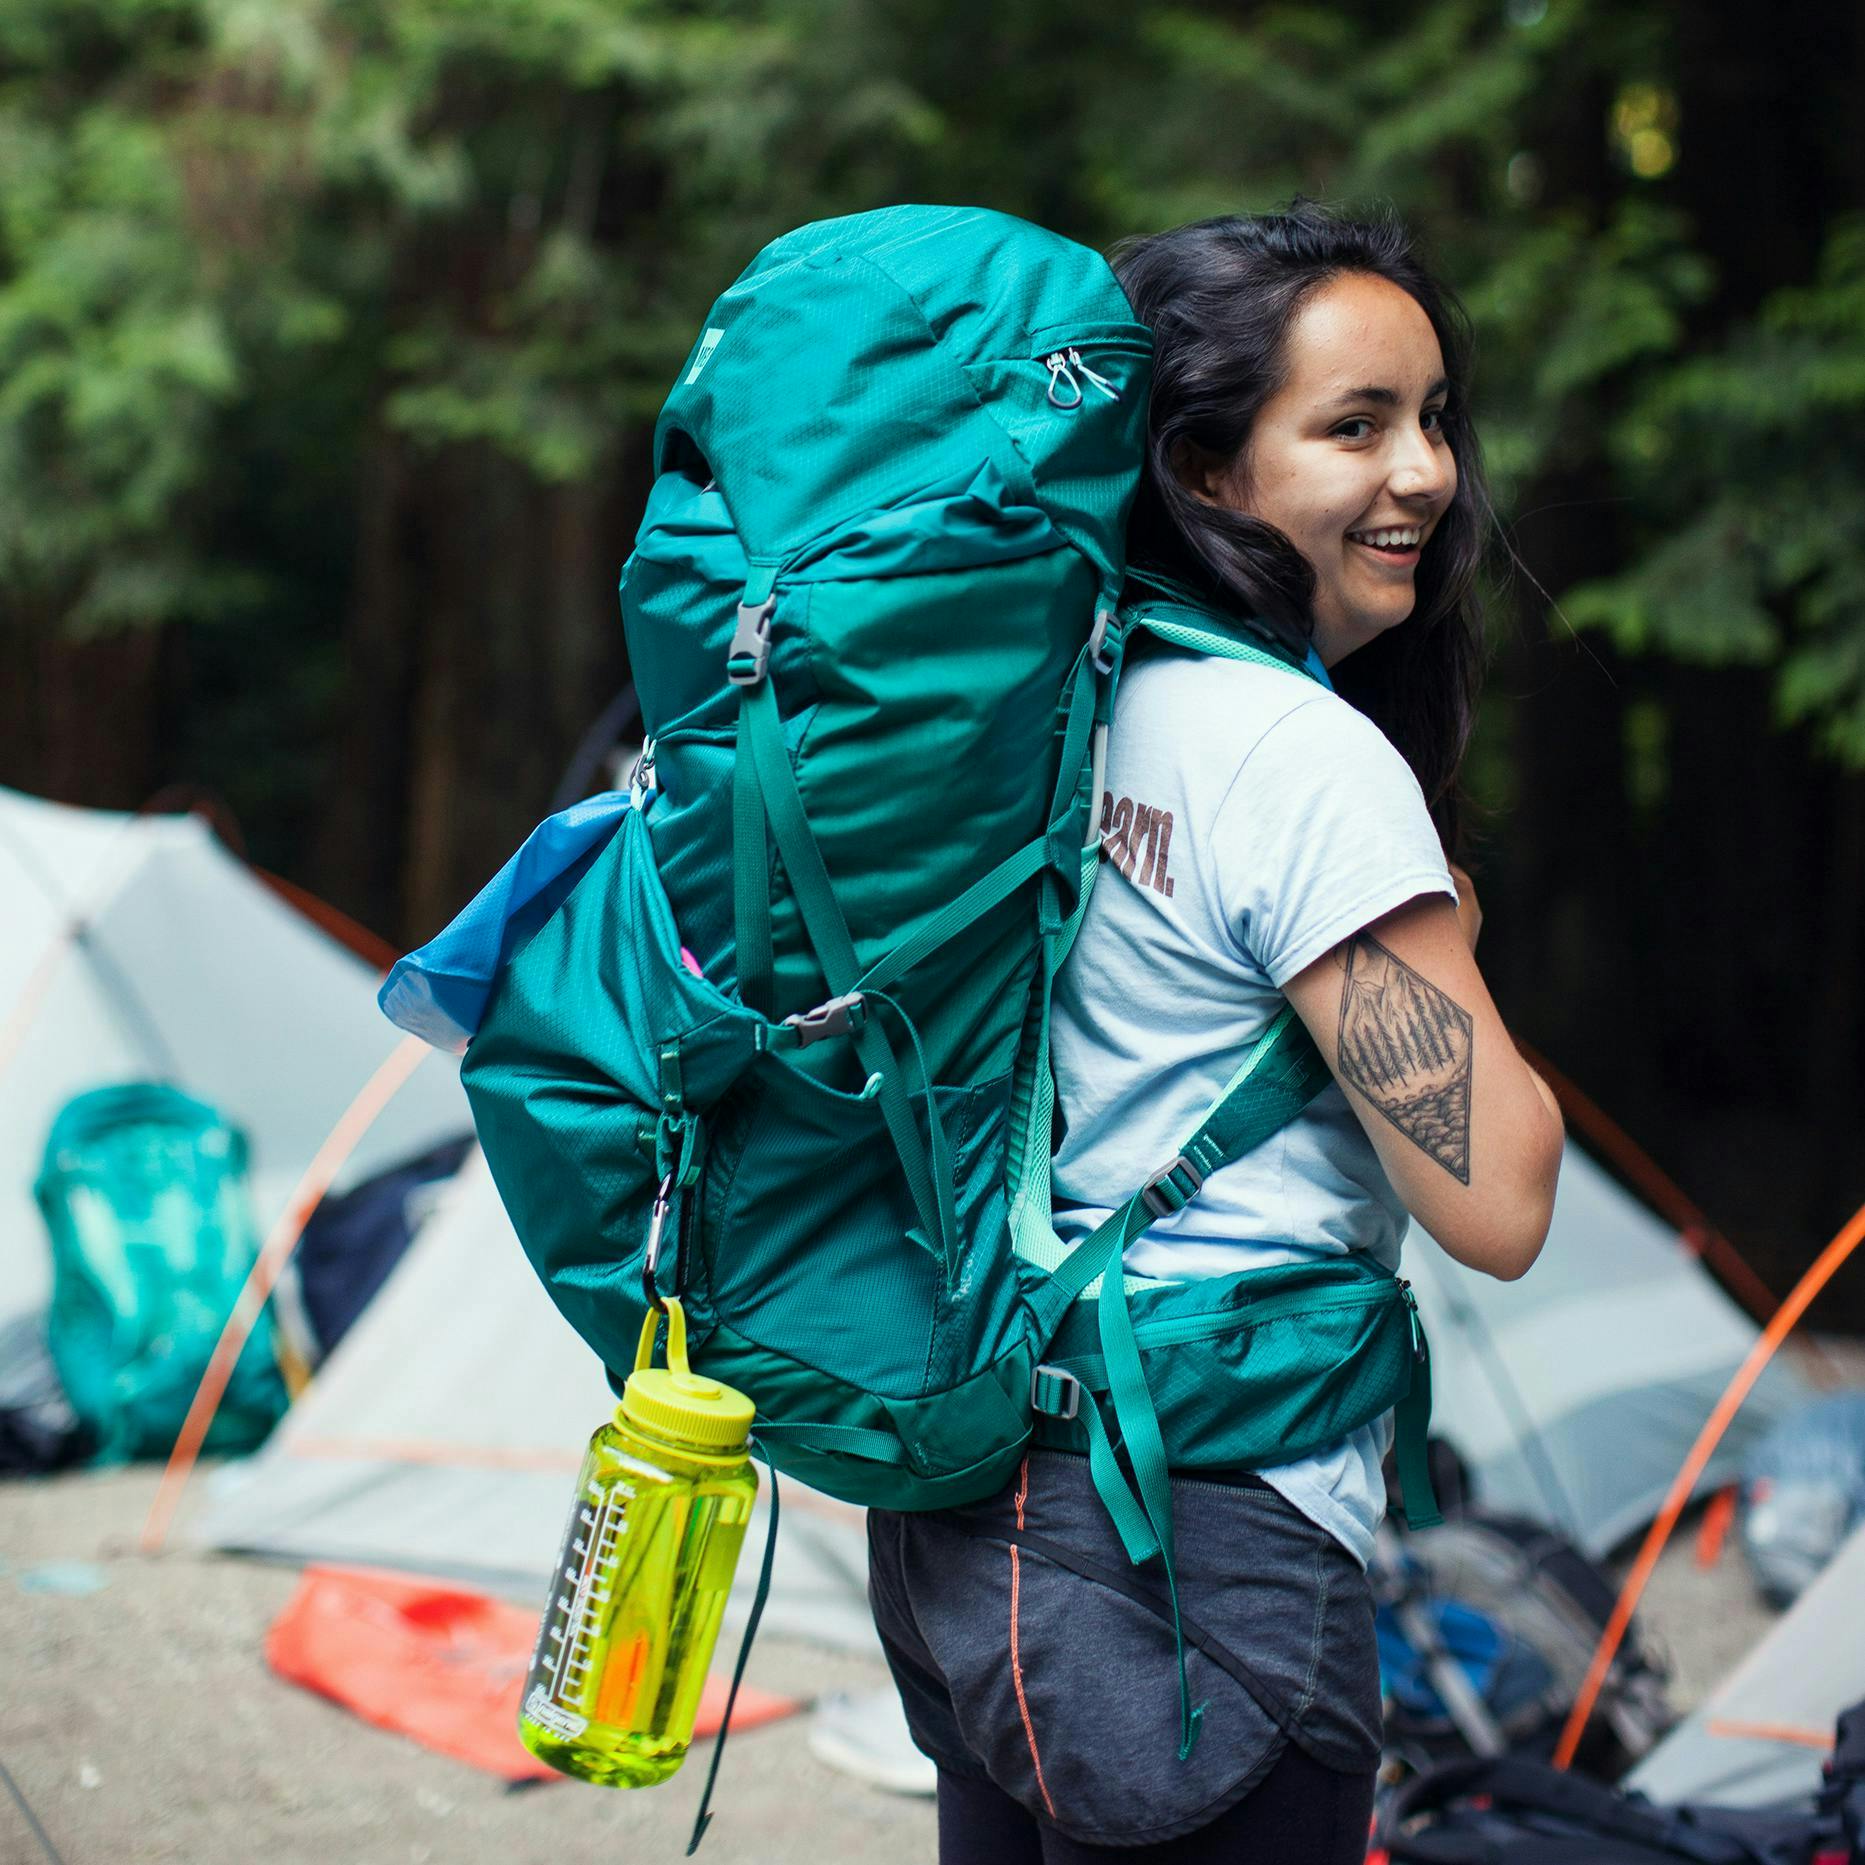 A young woman wearing a hiking backpack looks back over her shoulder and smiles.